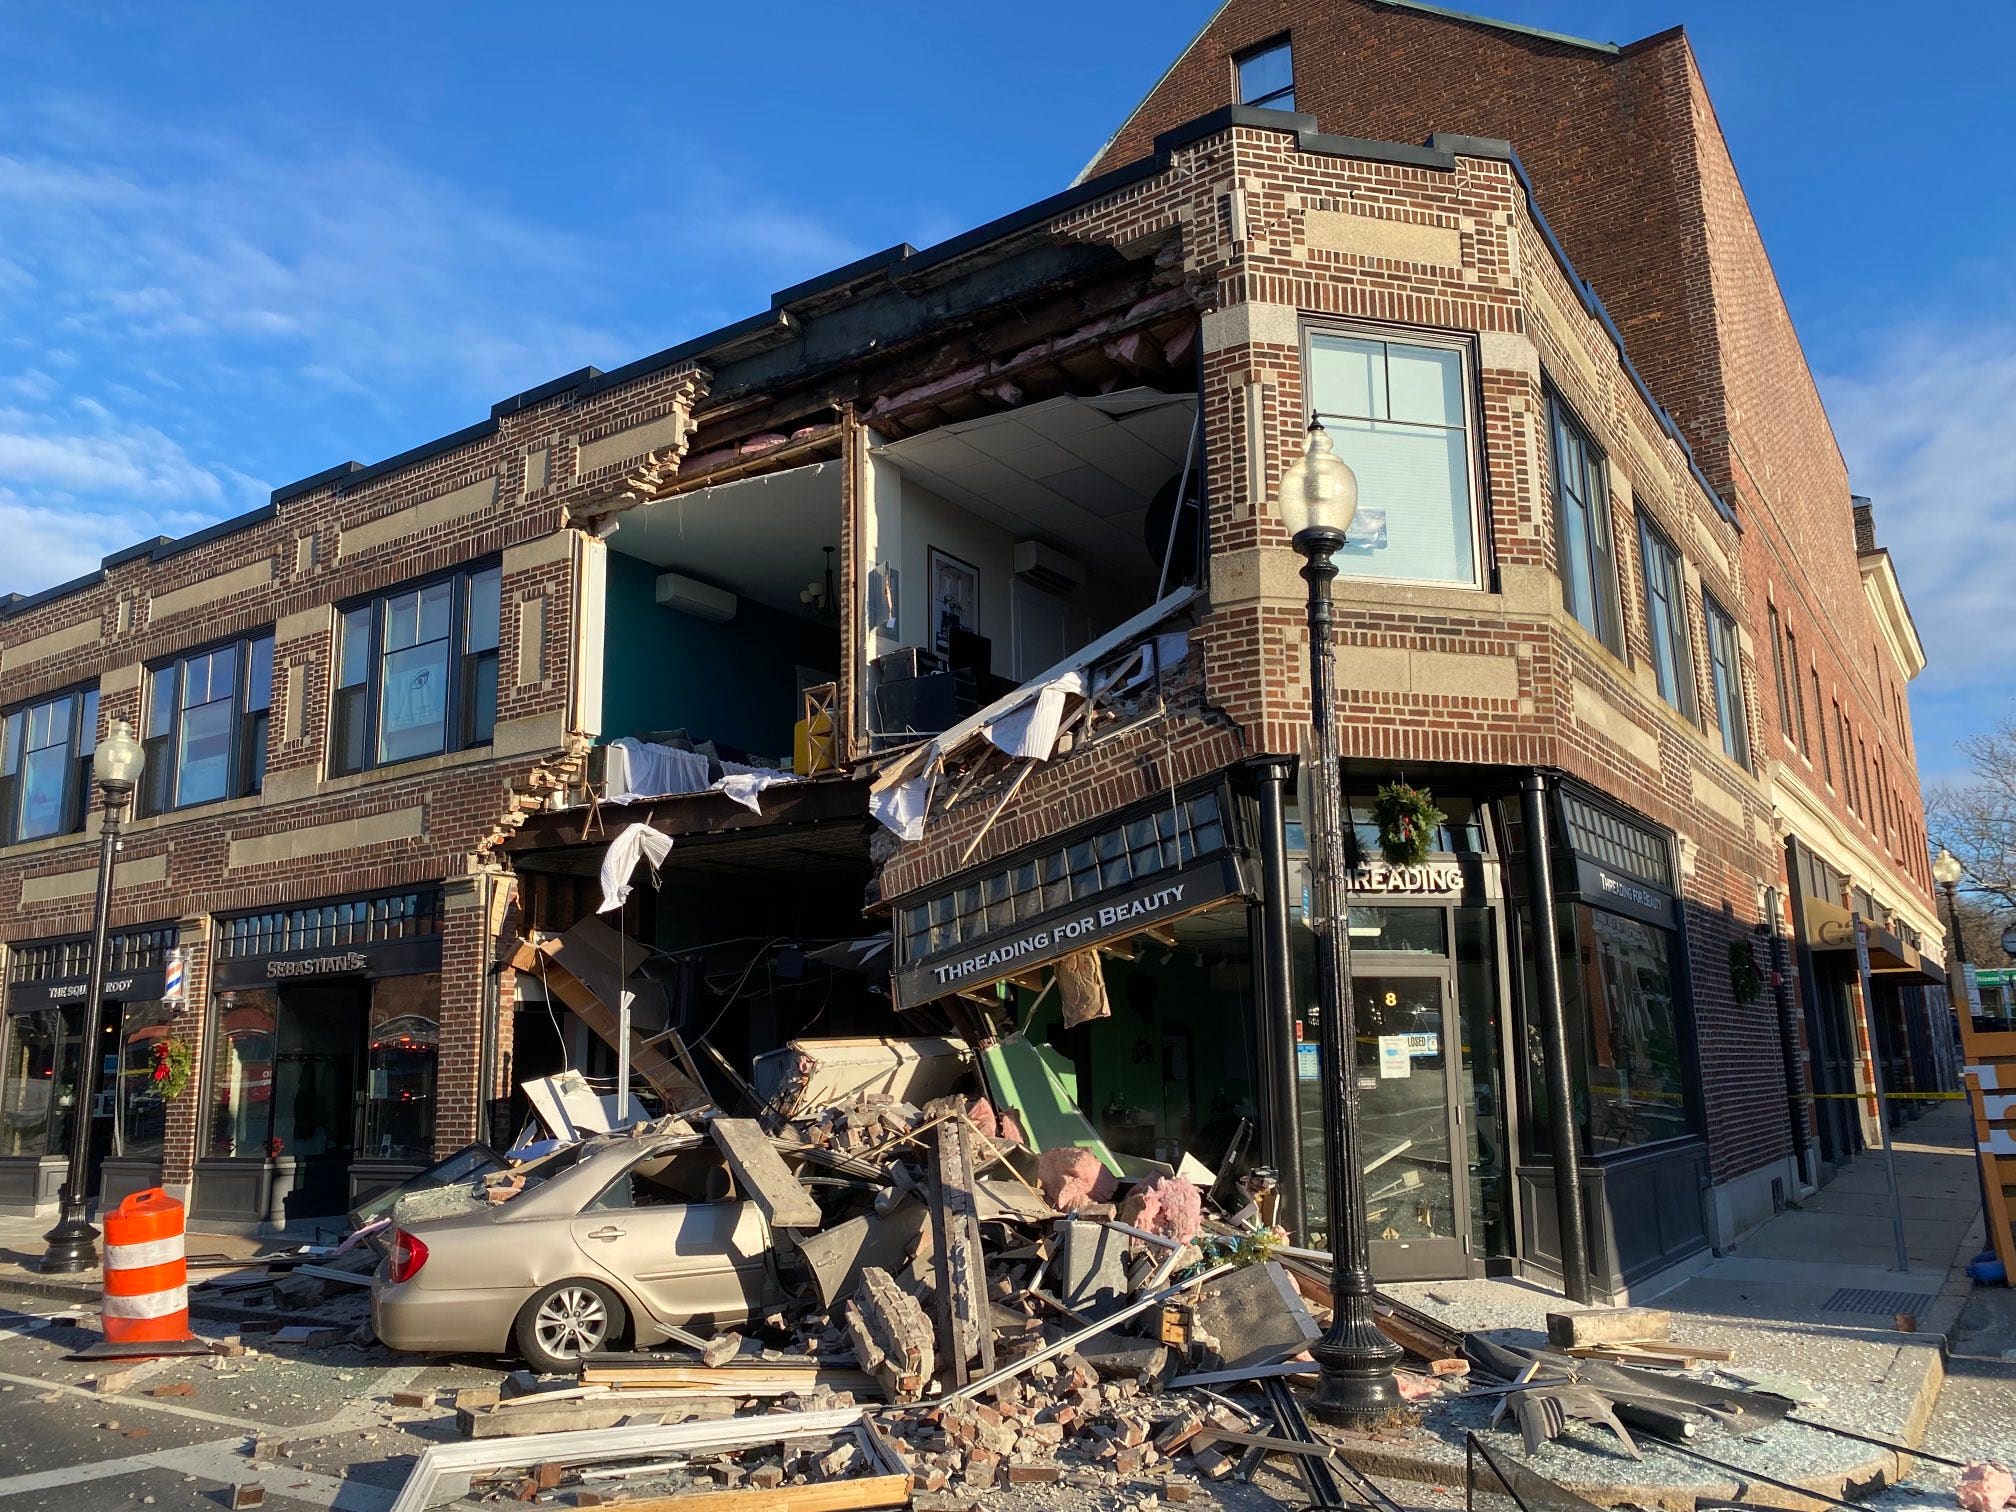 Massachusetts building's facade crumbles after car crashes into it